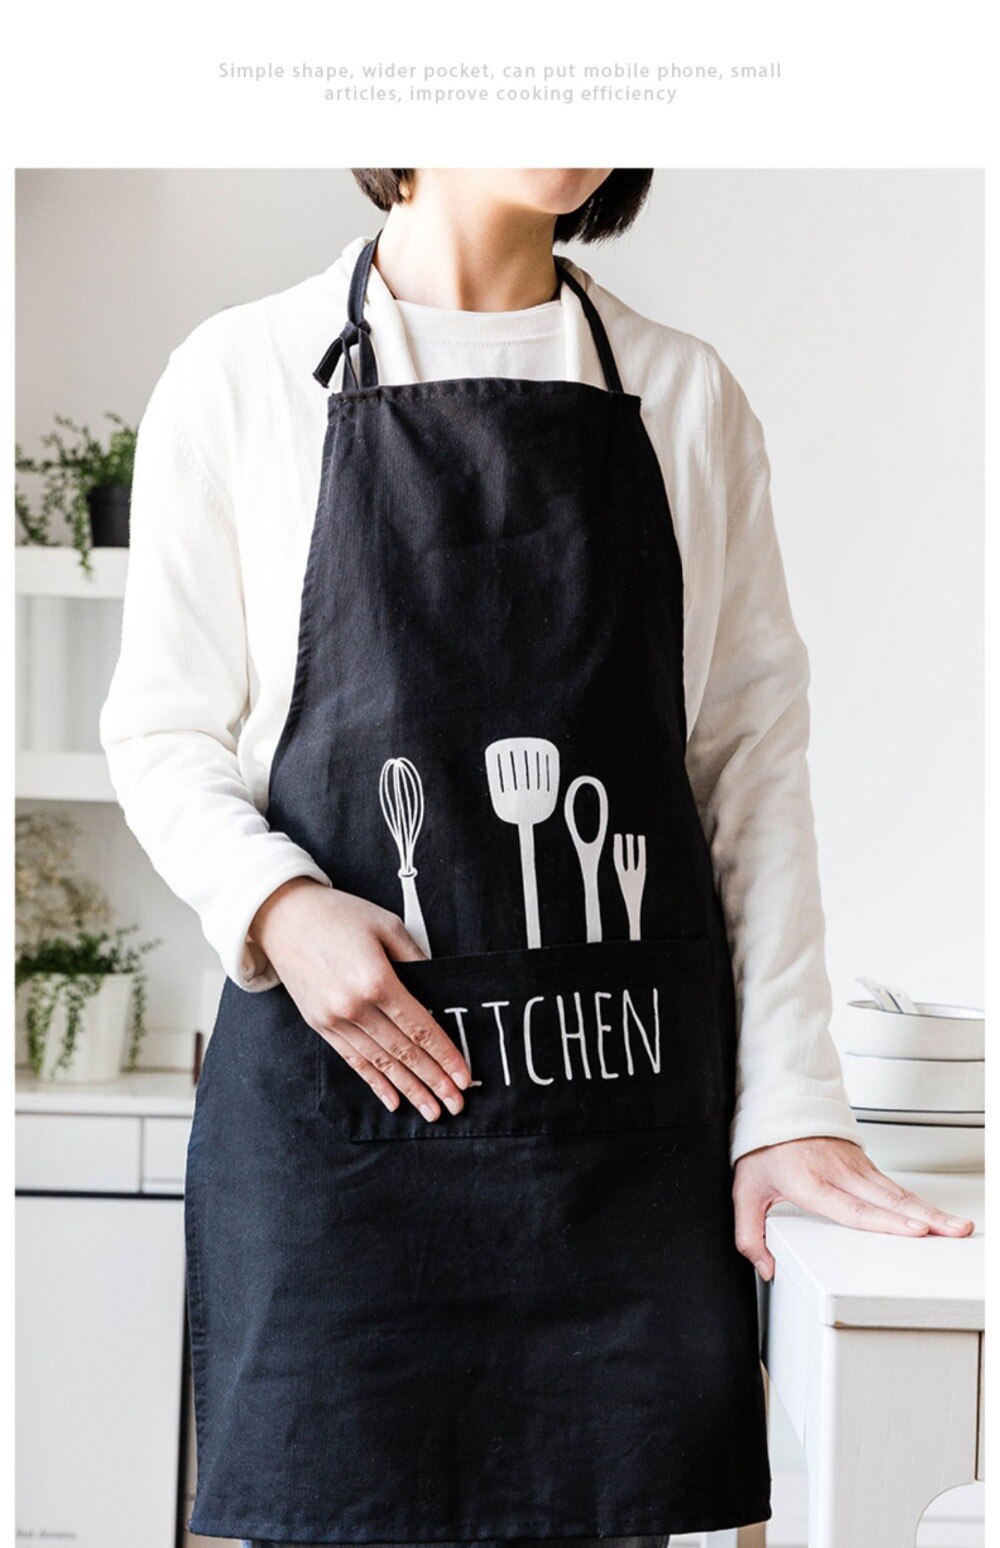 Adjustable Kitchen Apron With Pockets